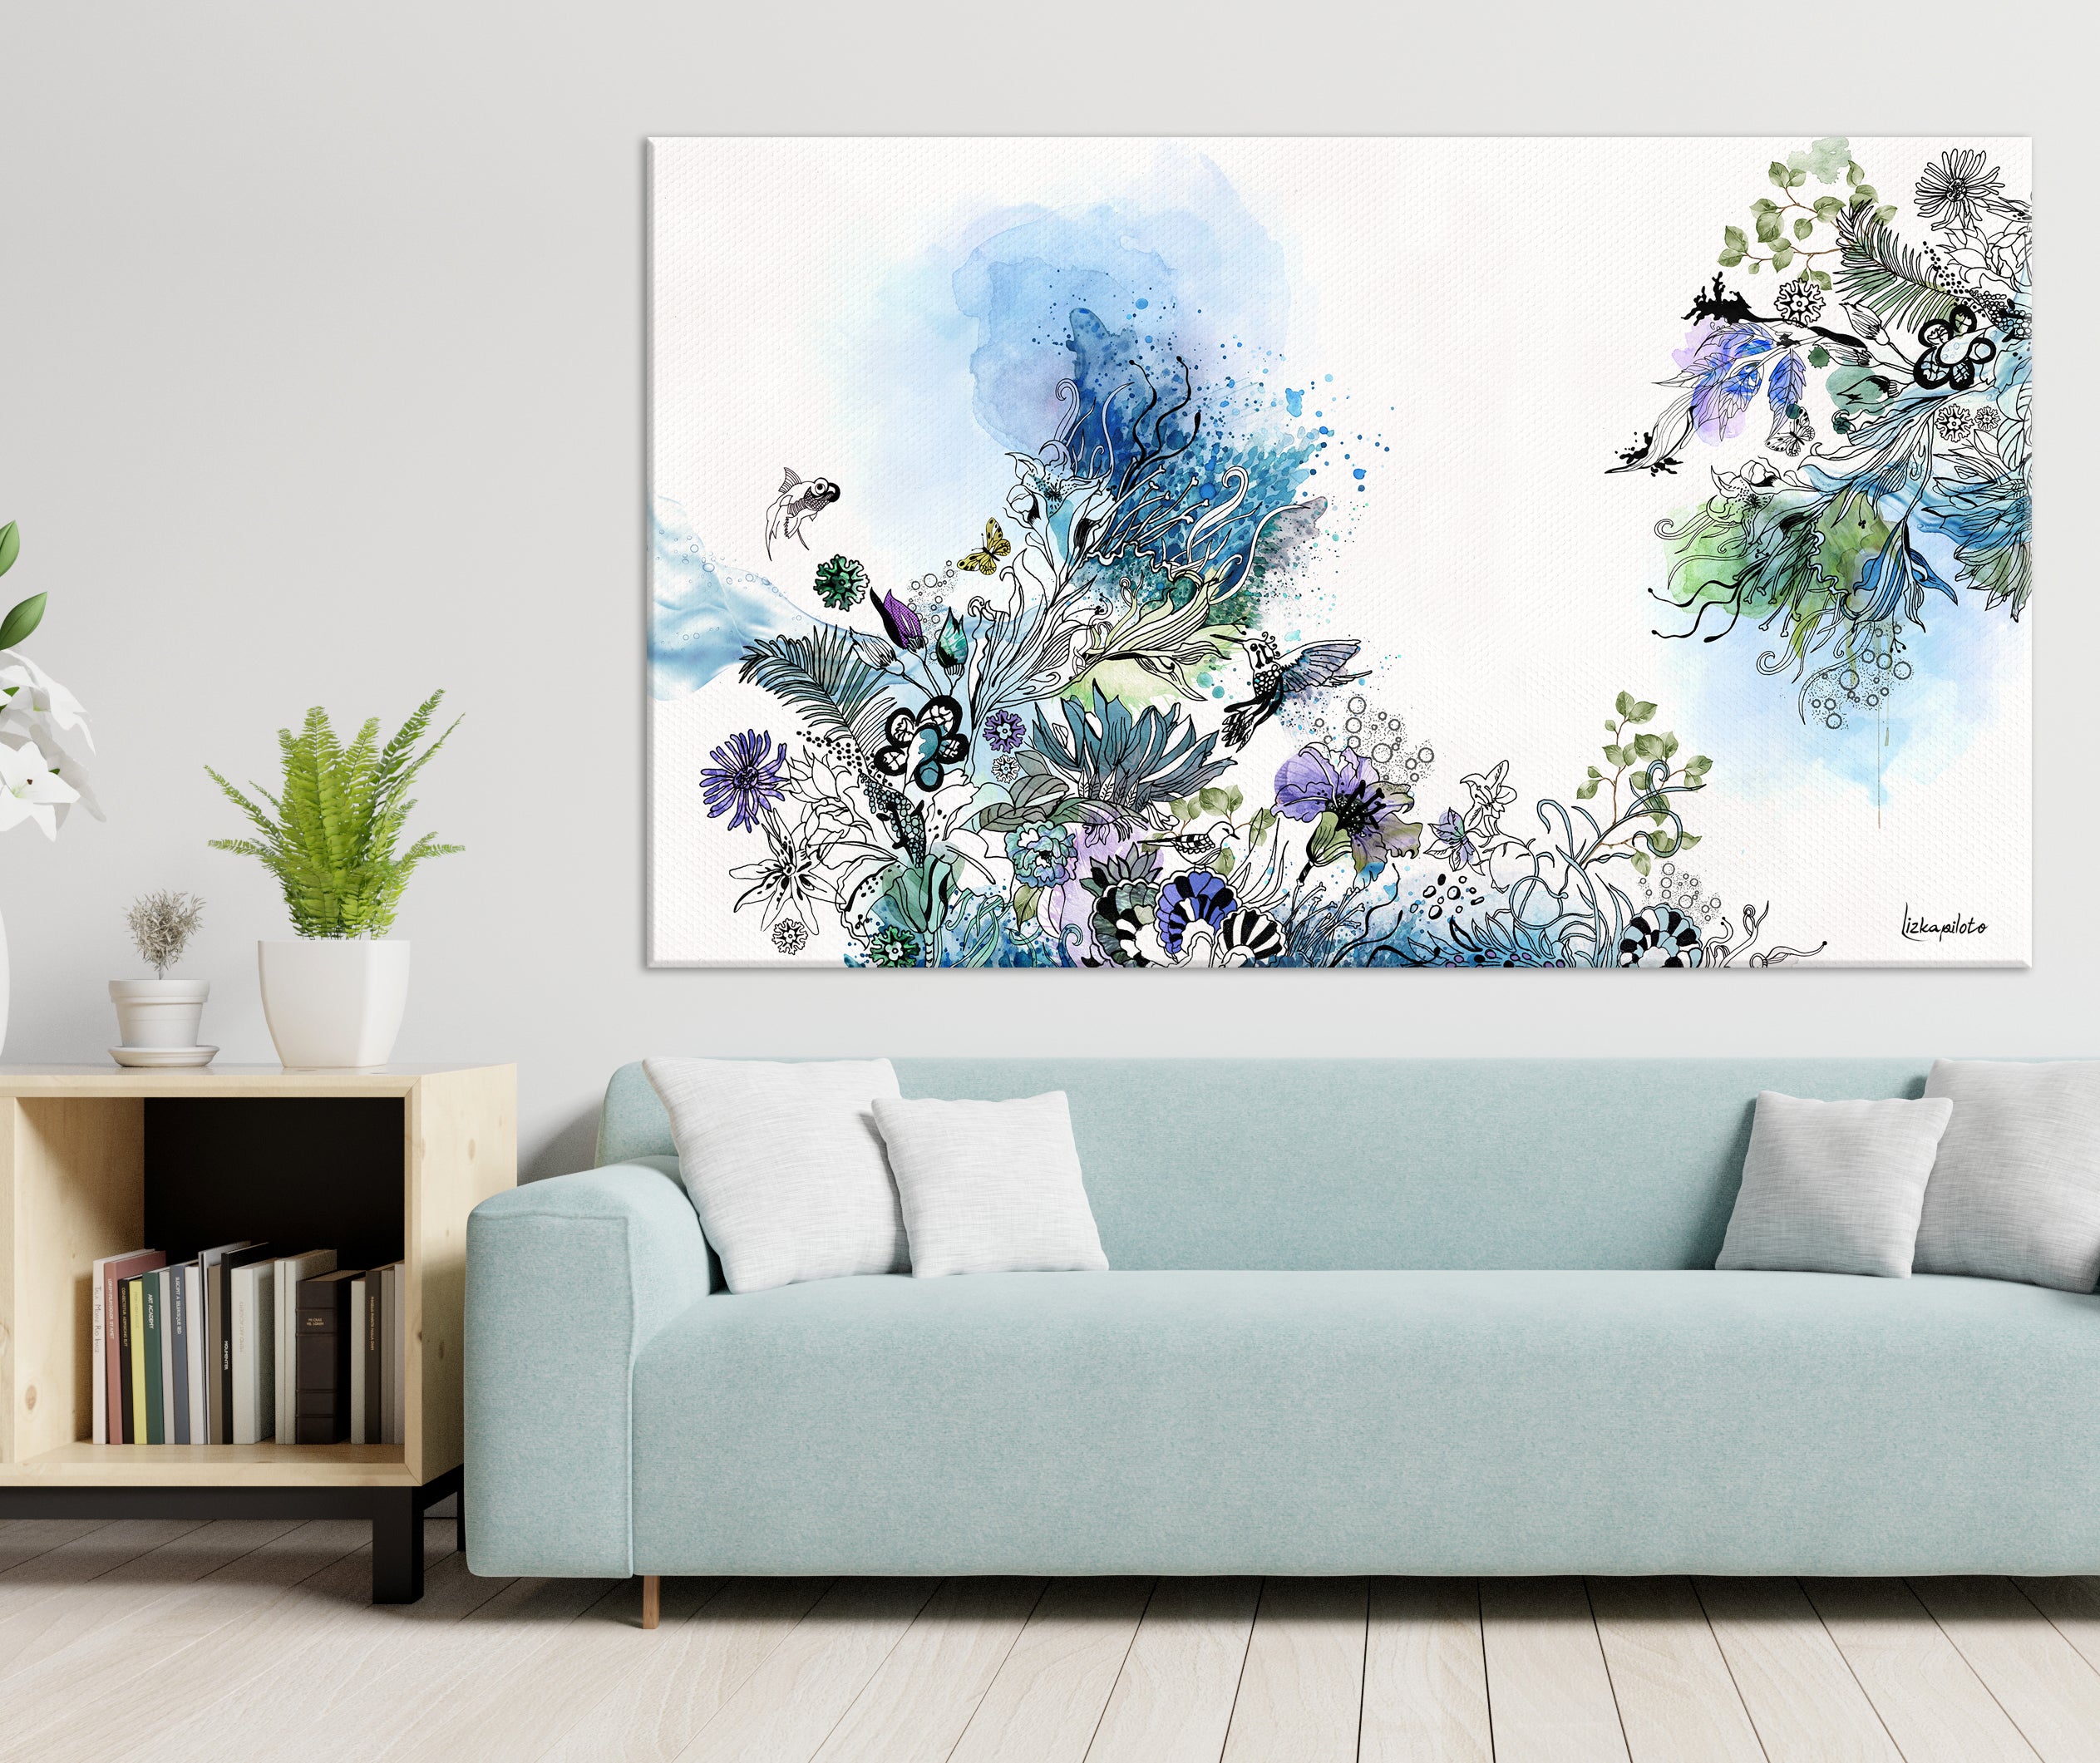 A large abstract painting, above light blue sofa